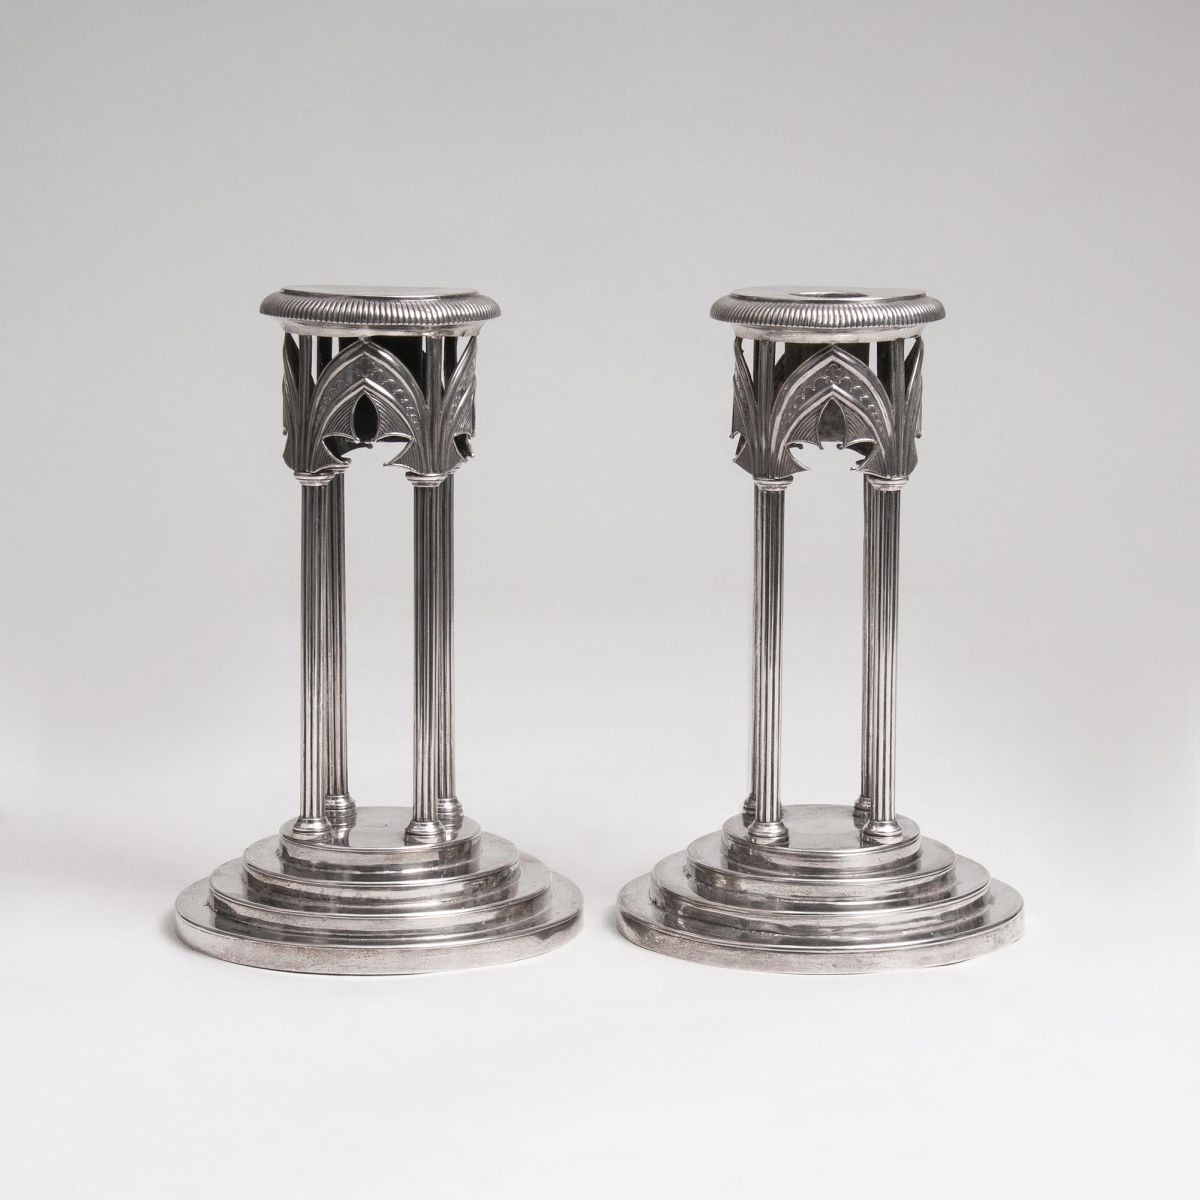 A Pair of rare Spanish Candle Holders with Neogothic Decor